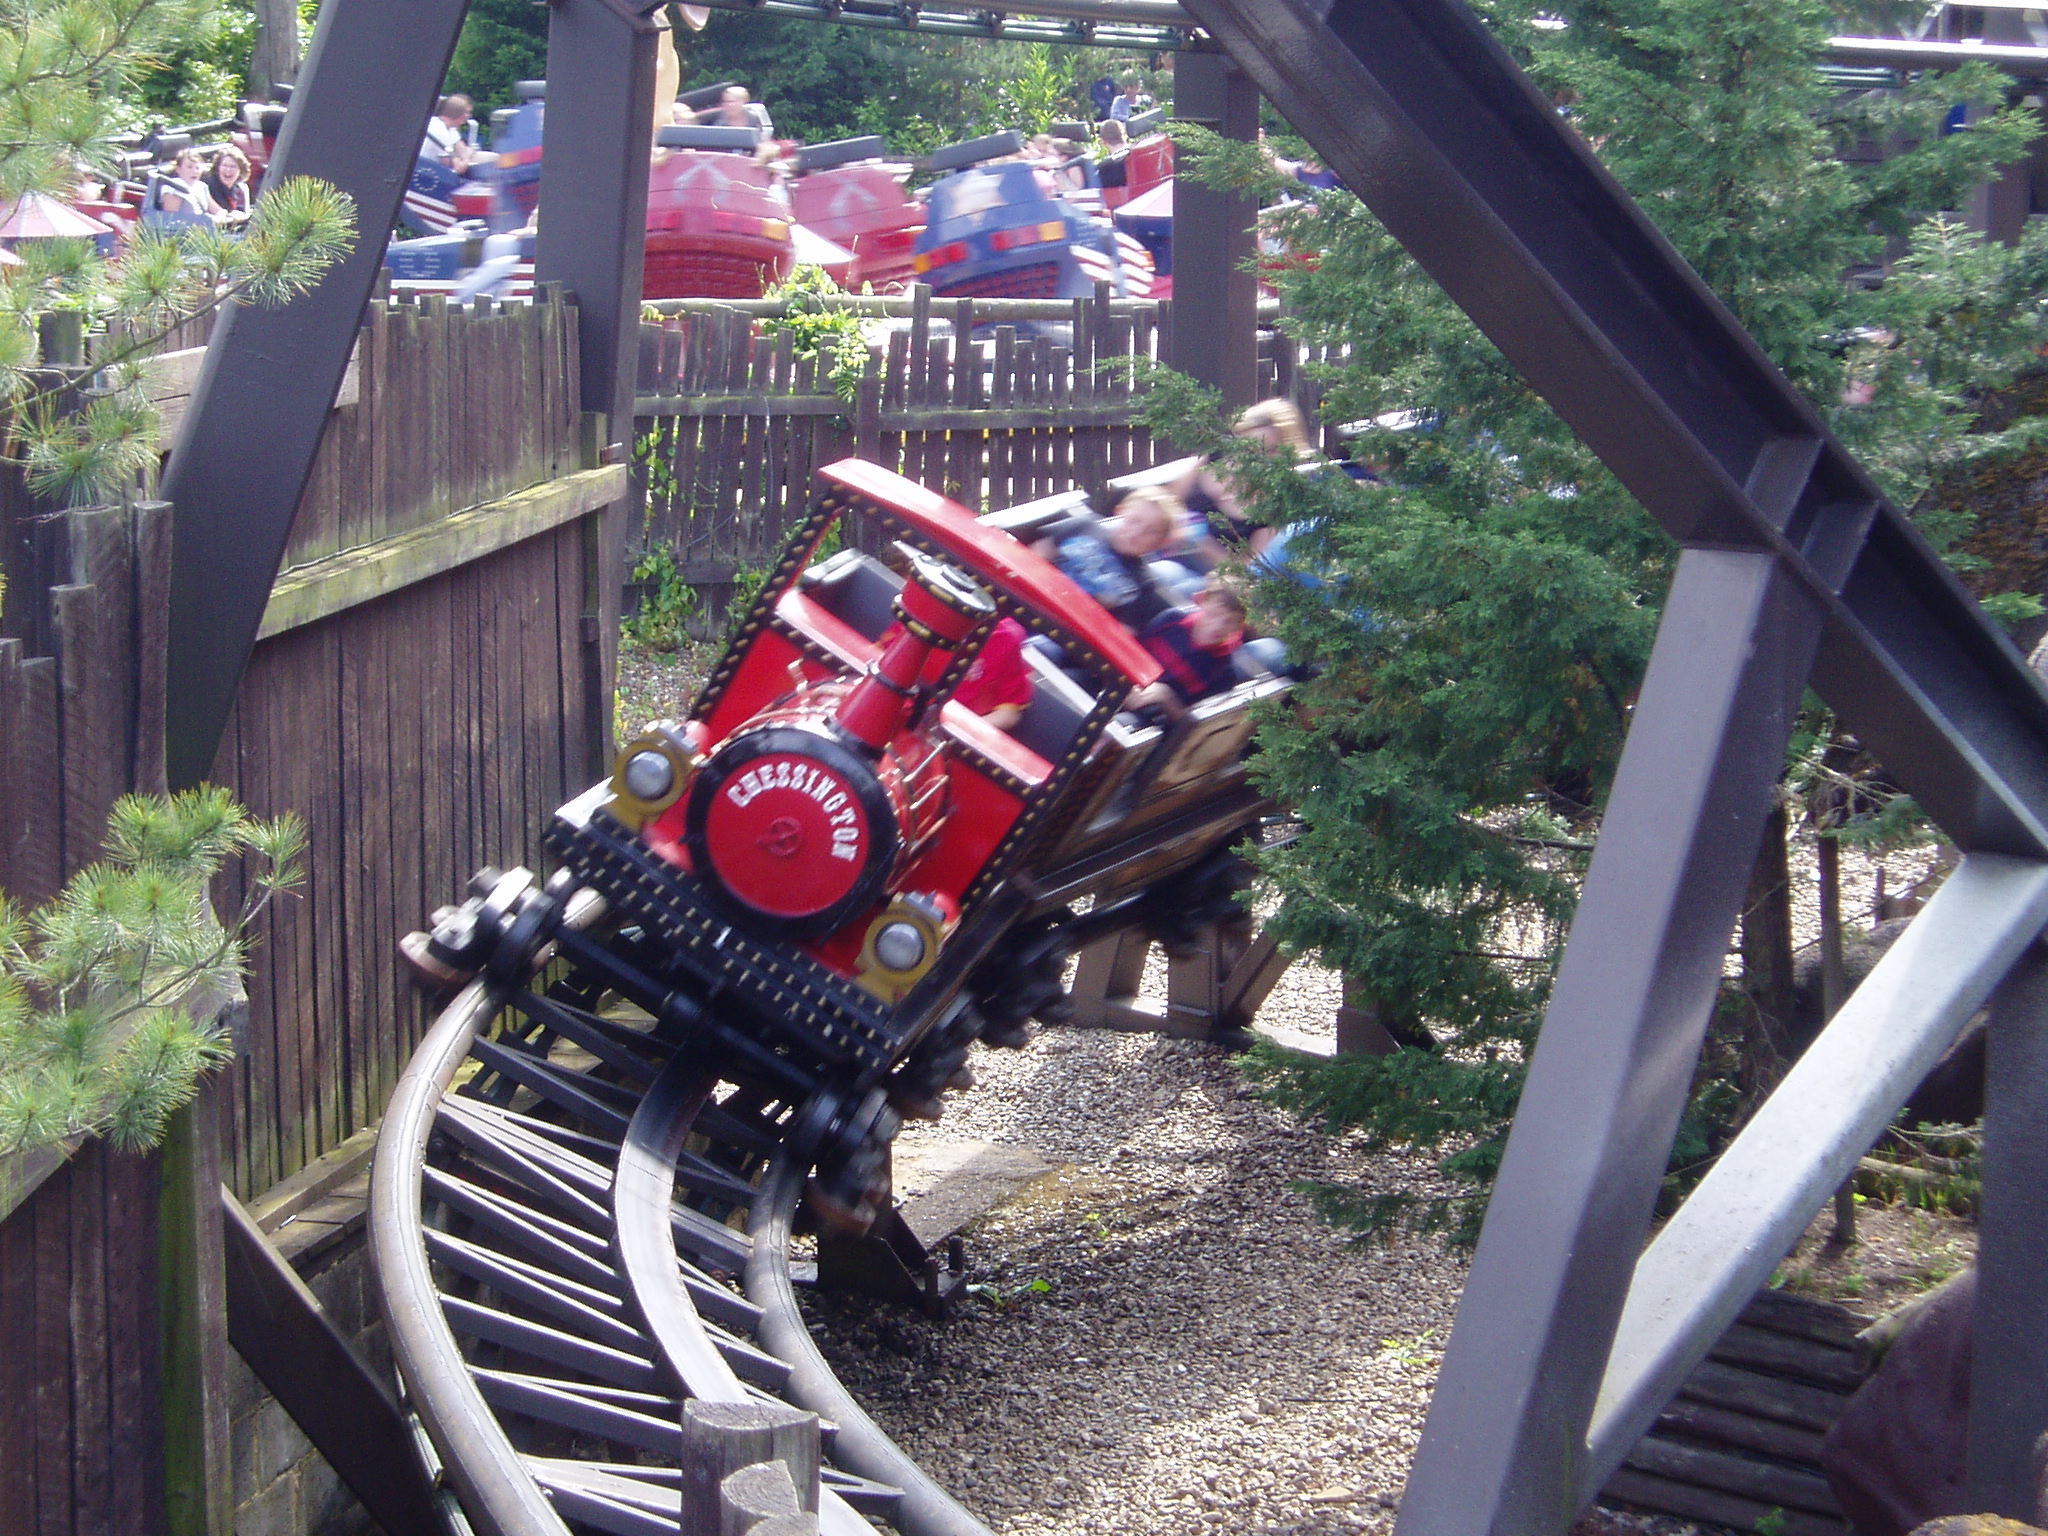 You are currently viewing Scorpion Express (Chessington World of Adventures)